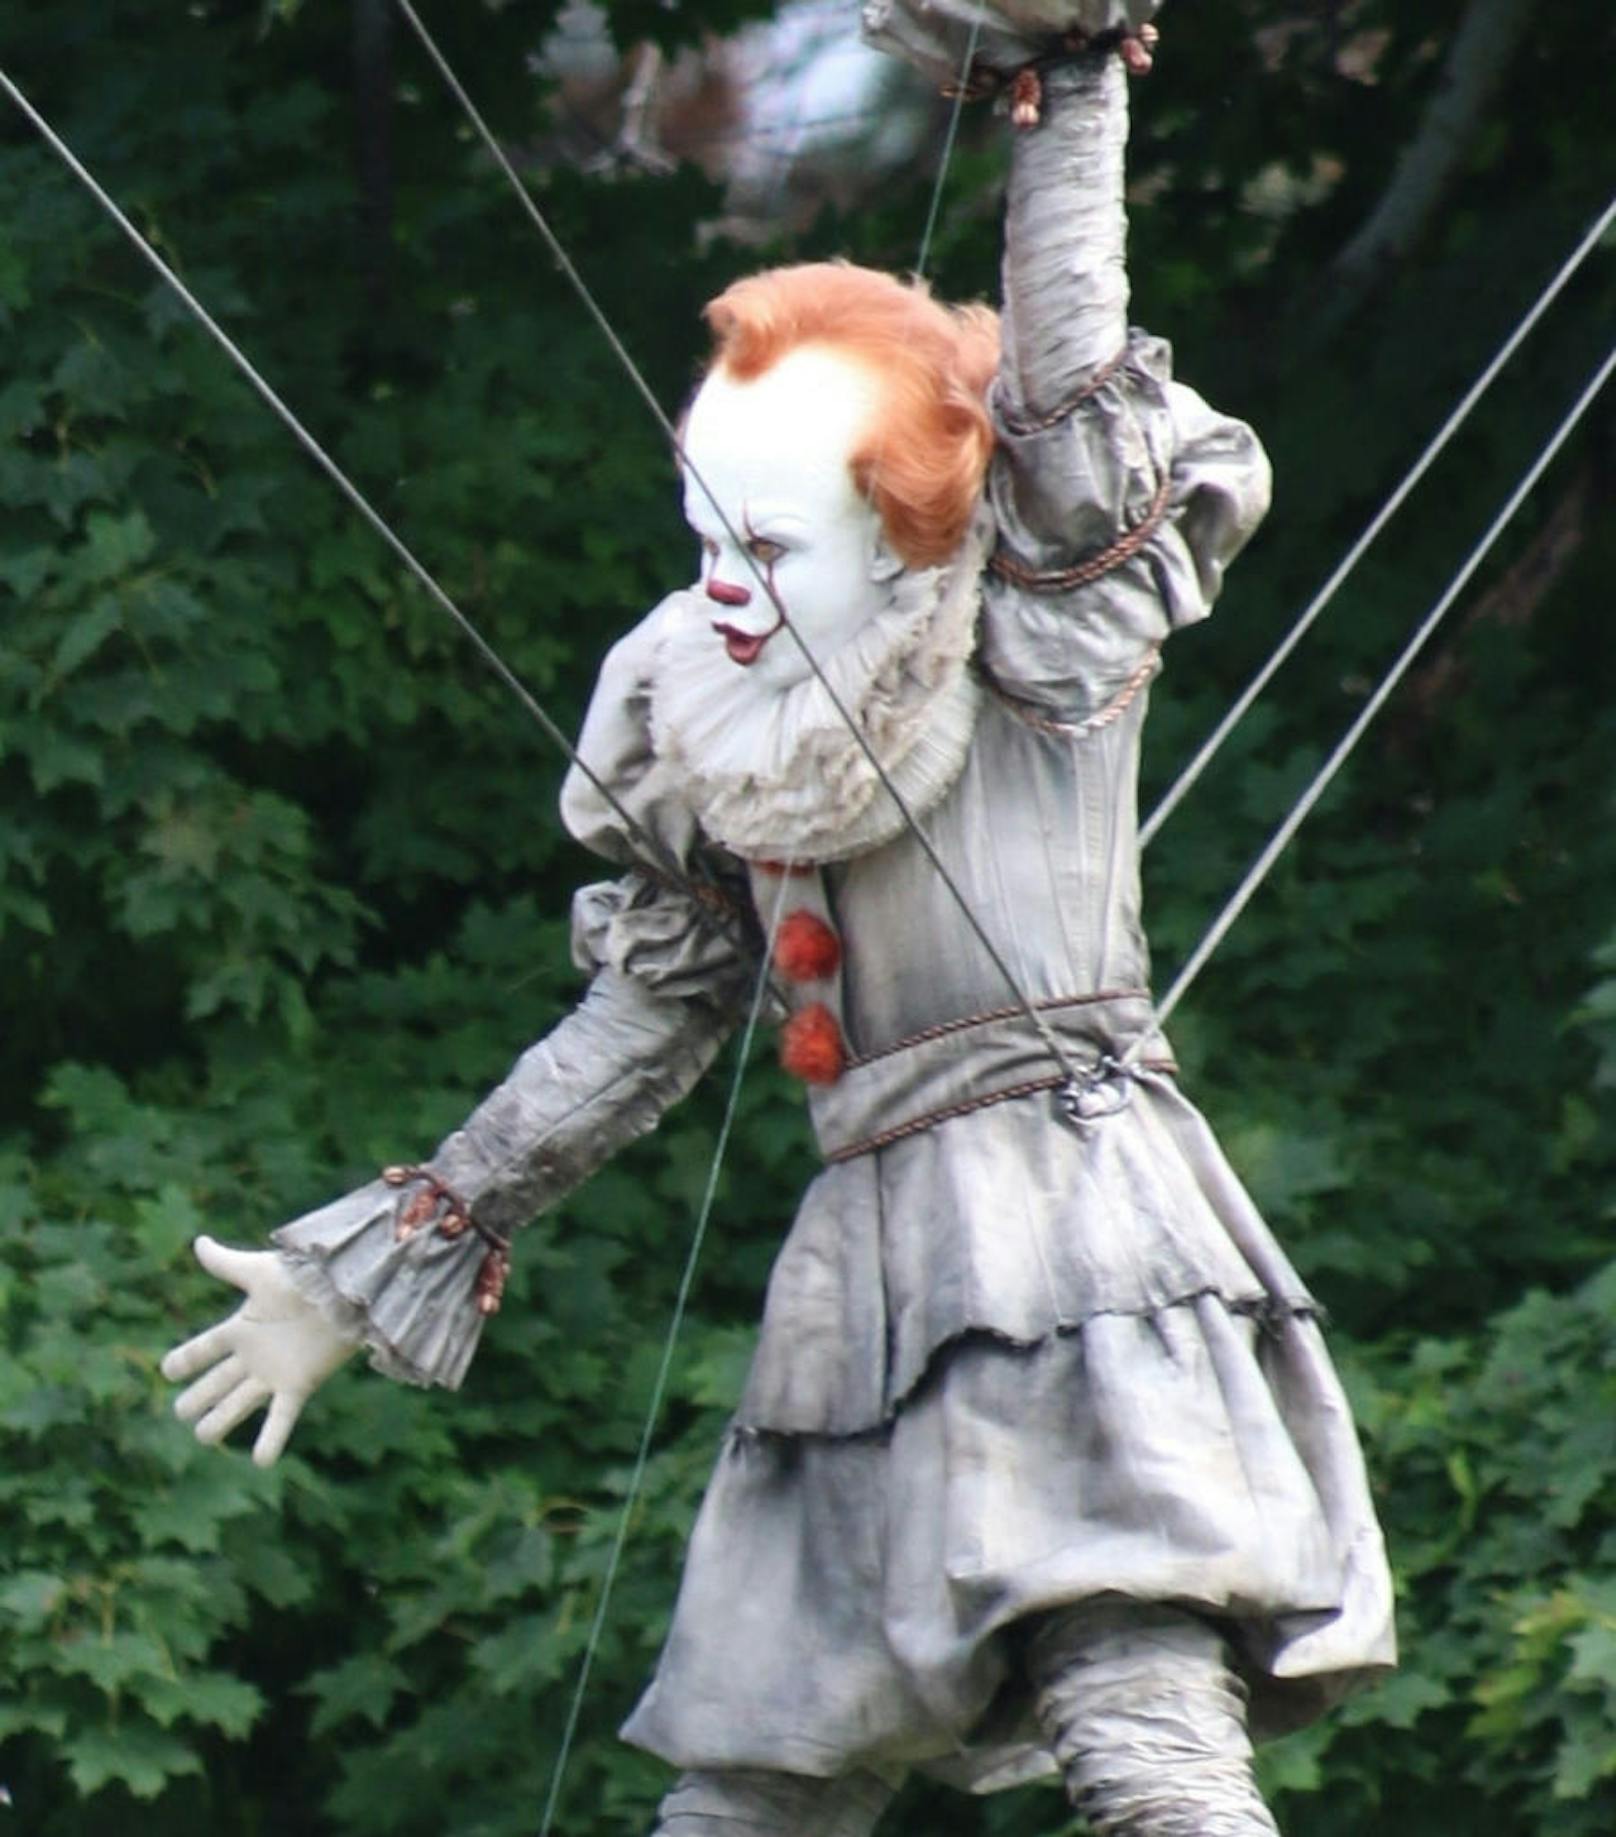 4. Pennywise